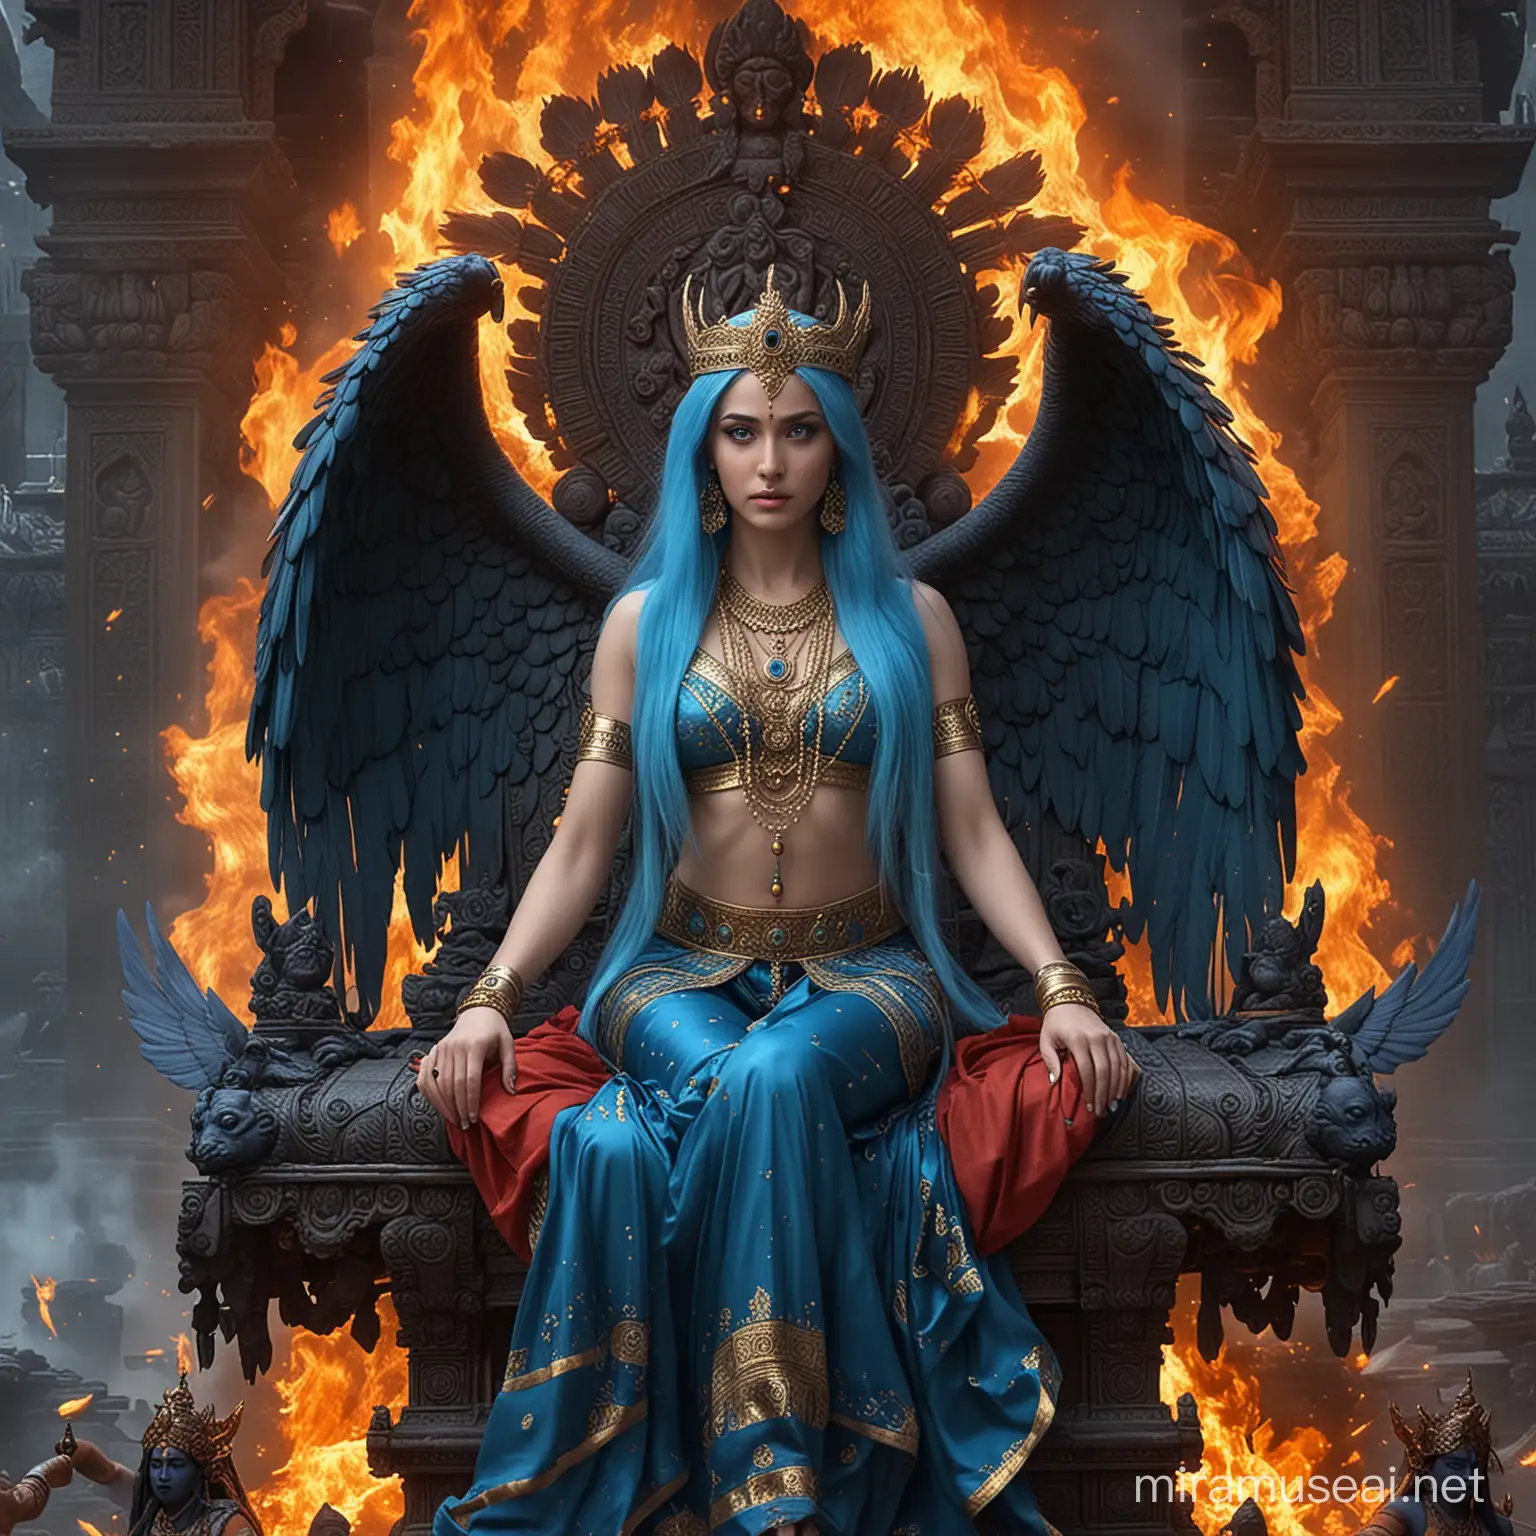 Majestic Hindu Empress Surrounded by Divine and Demonic Power